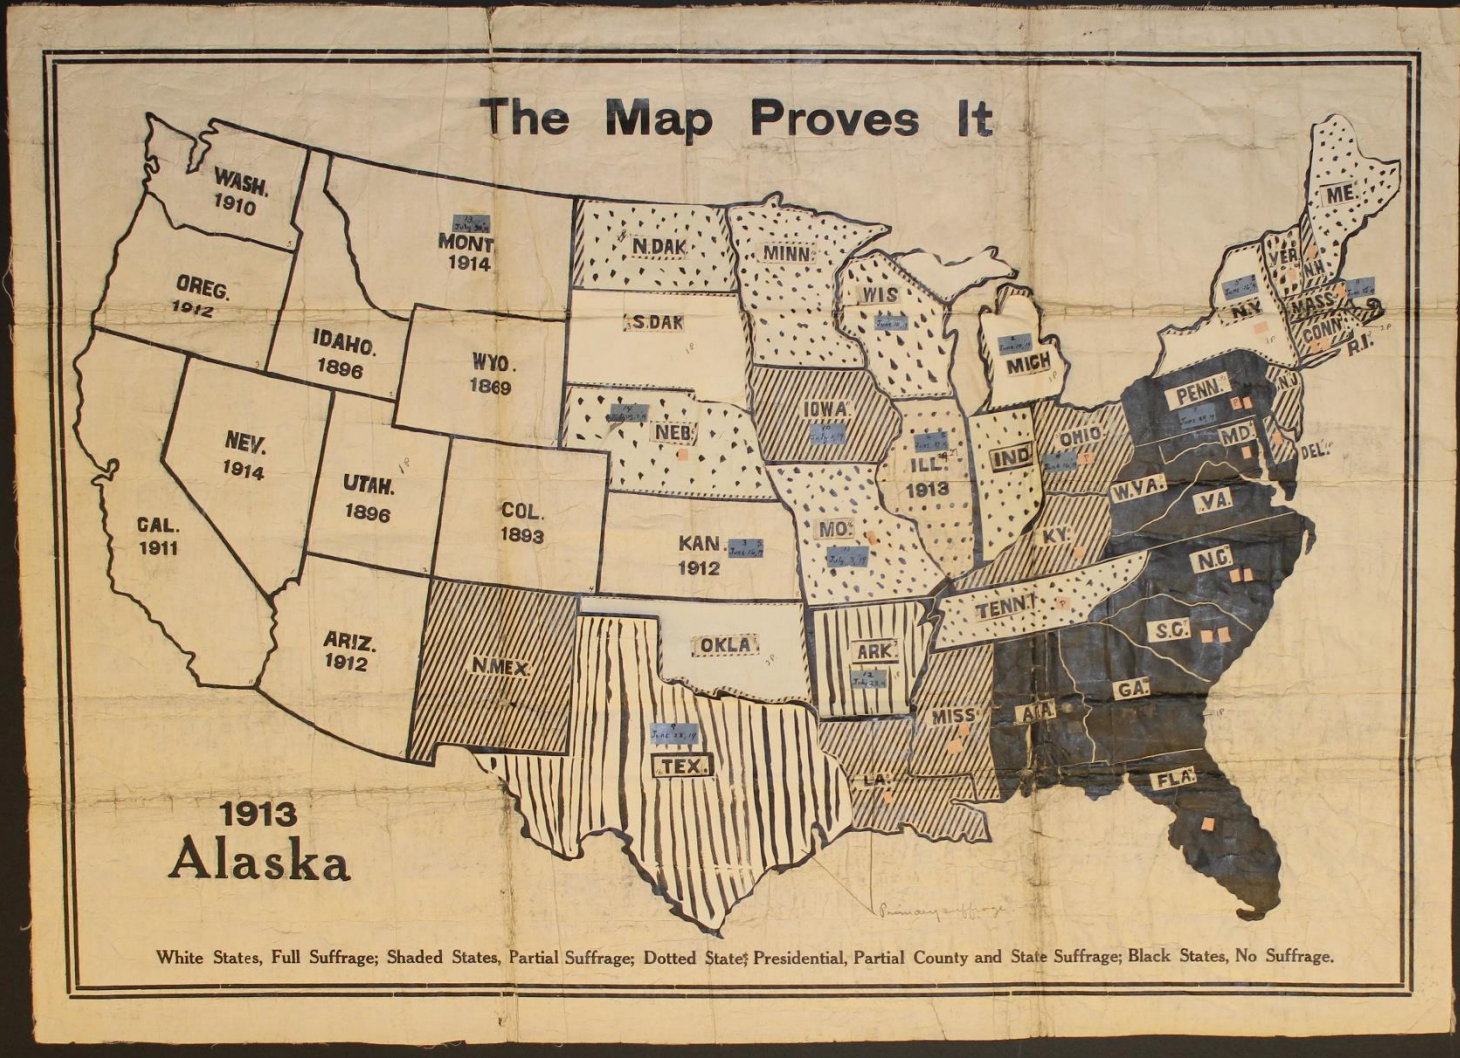 "The Map Proves It" Map of the United States that shows women's suffrage across the country in 1919. 